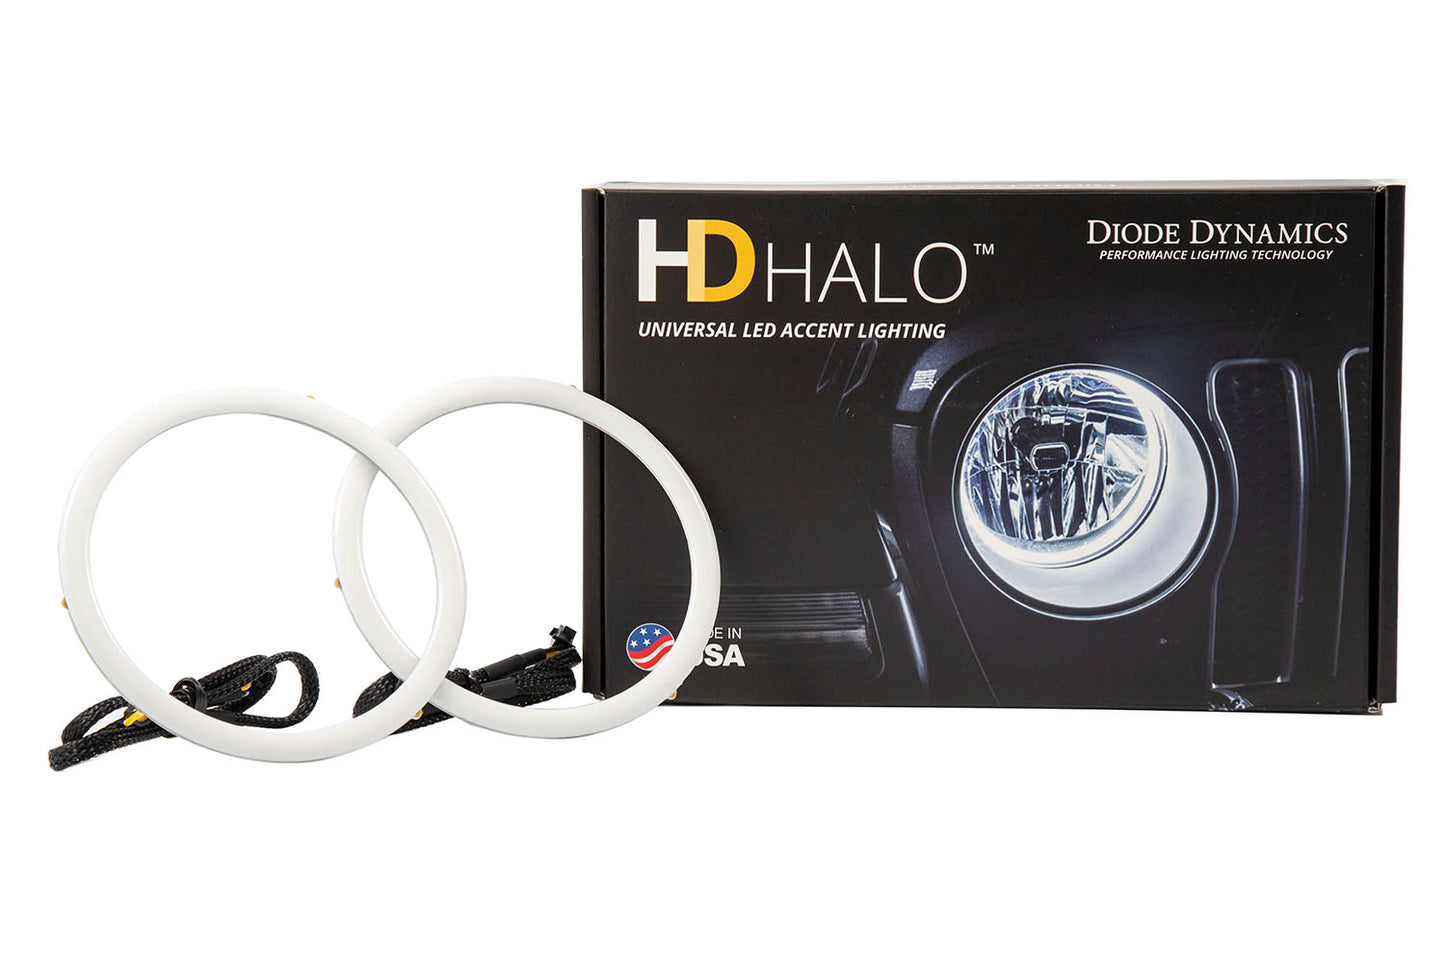 Halo Lights LED 130mm Switchback Pair Diode Dynamics